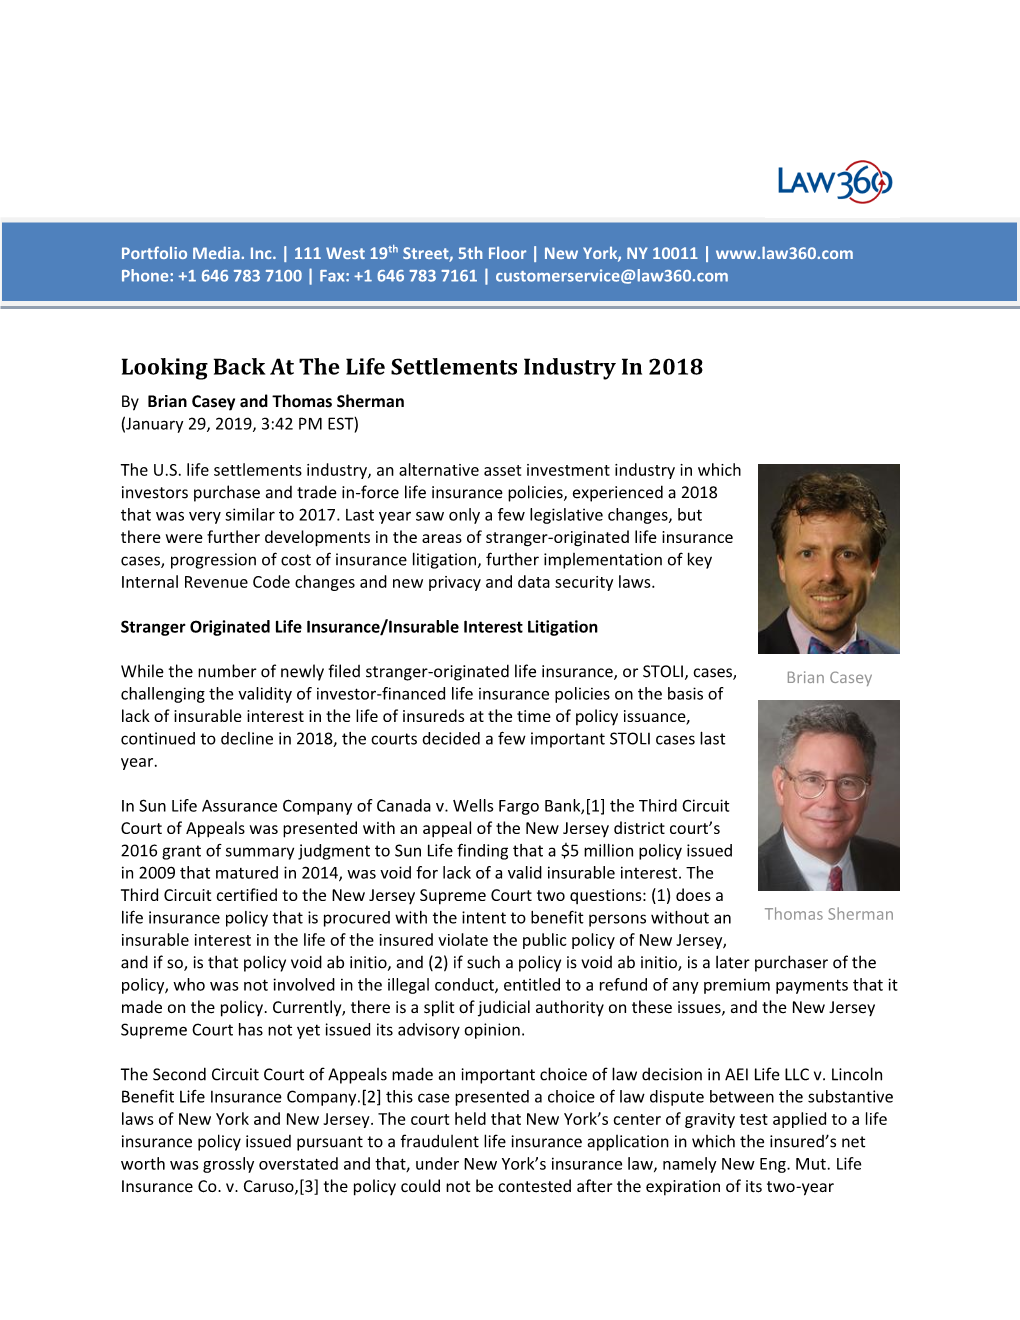 Looking Back at the Life Settlements Industry in 2018 by Brian Casey and Thomas Sherman (January 29, 2019, 3:42 PM EST)